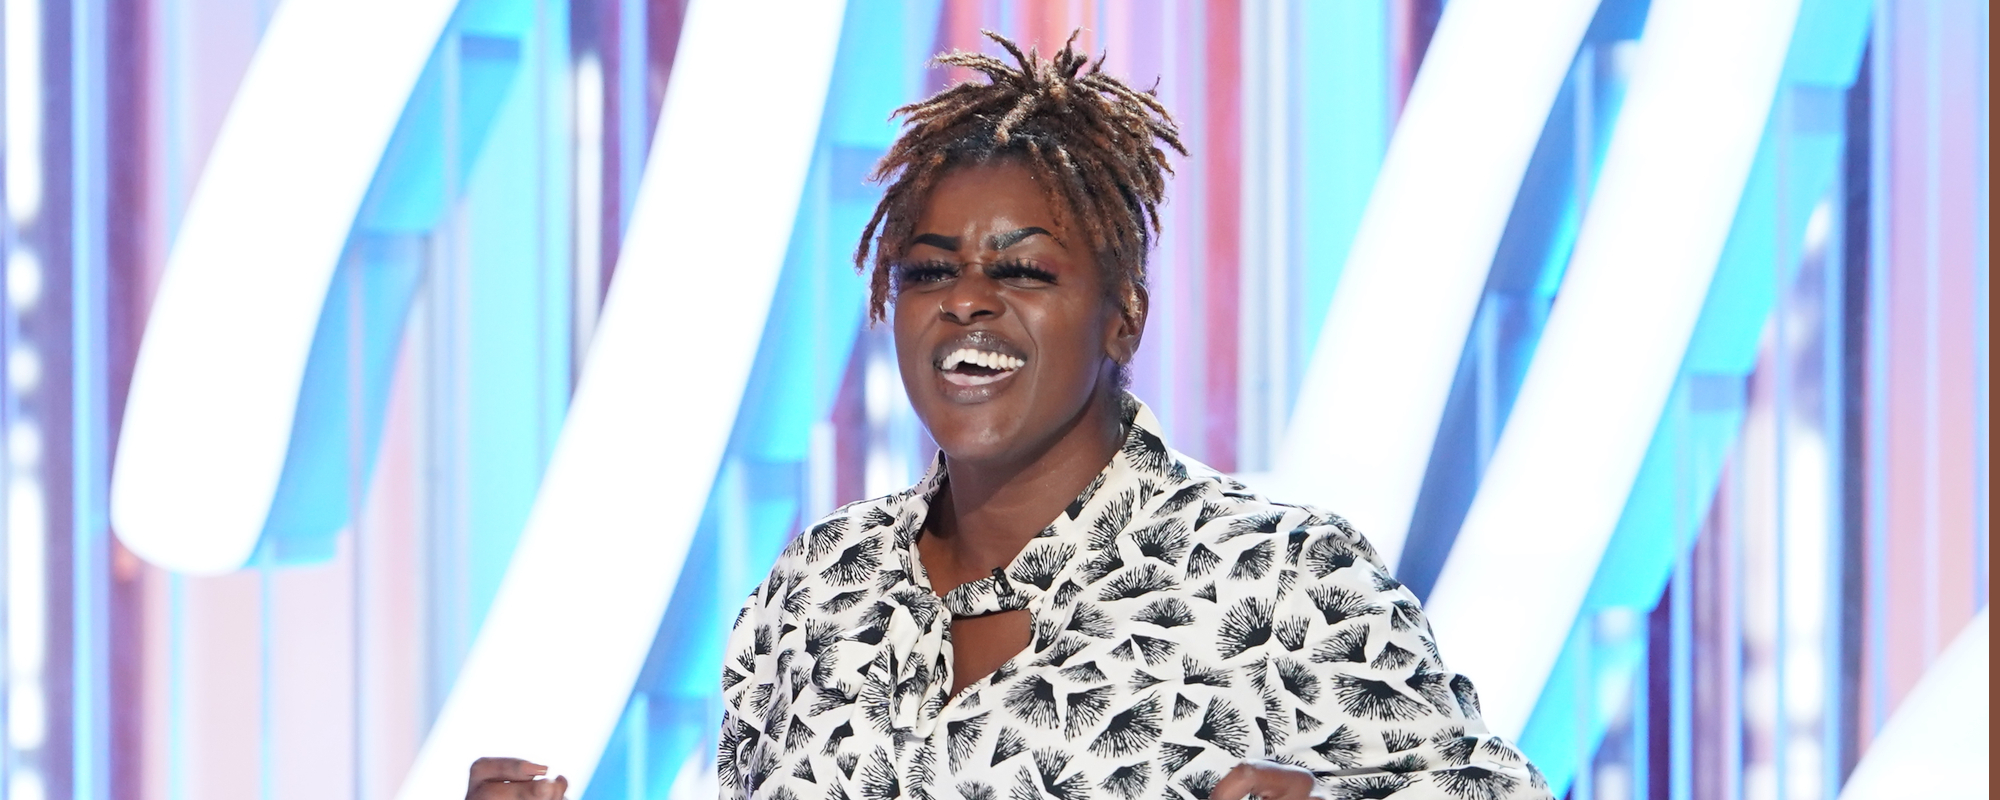 Singer Lucy Love Impresses ‘American Idol’ Judges… After a Second Chance